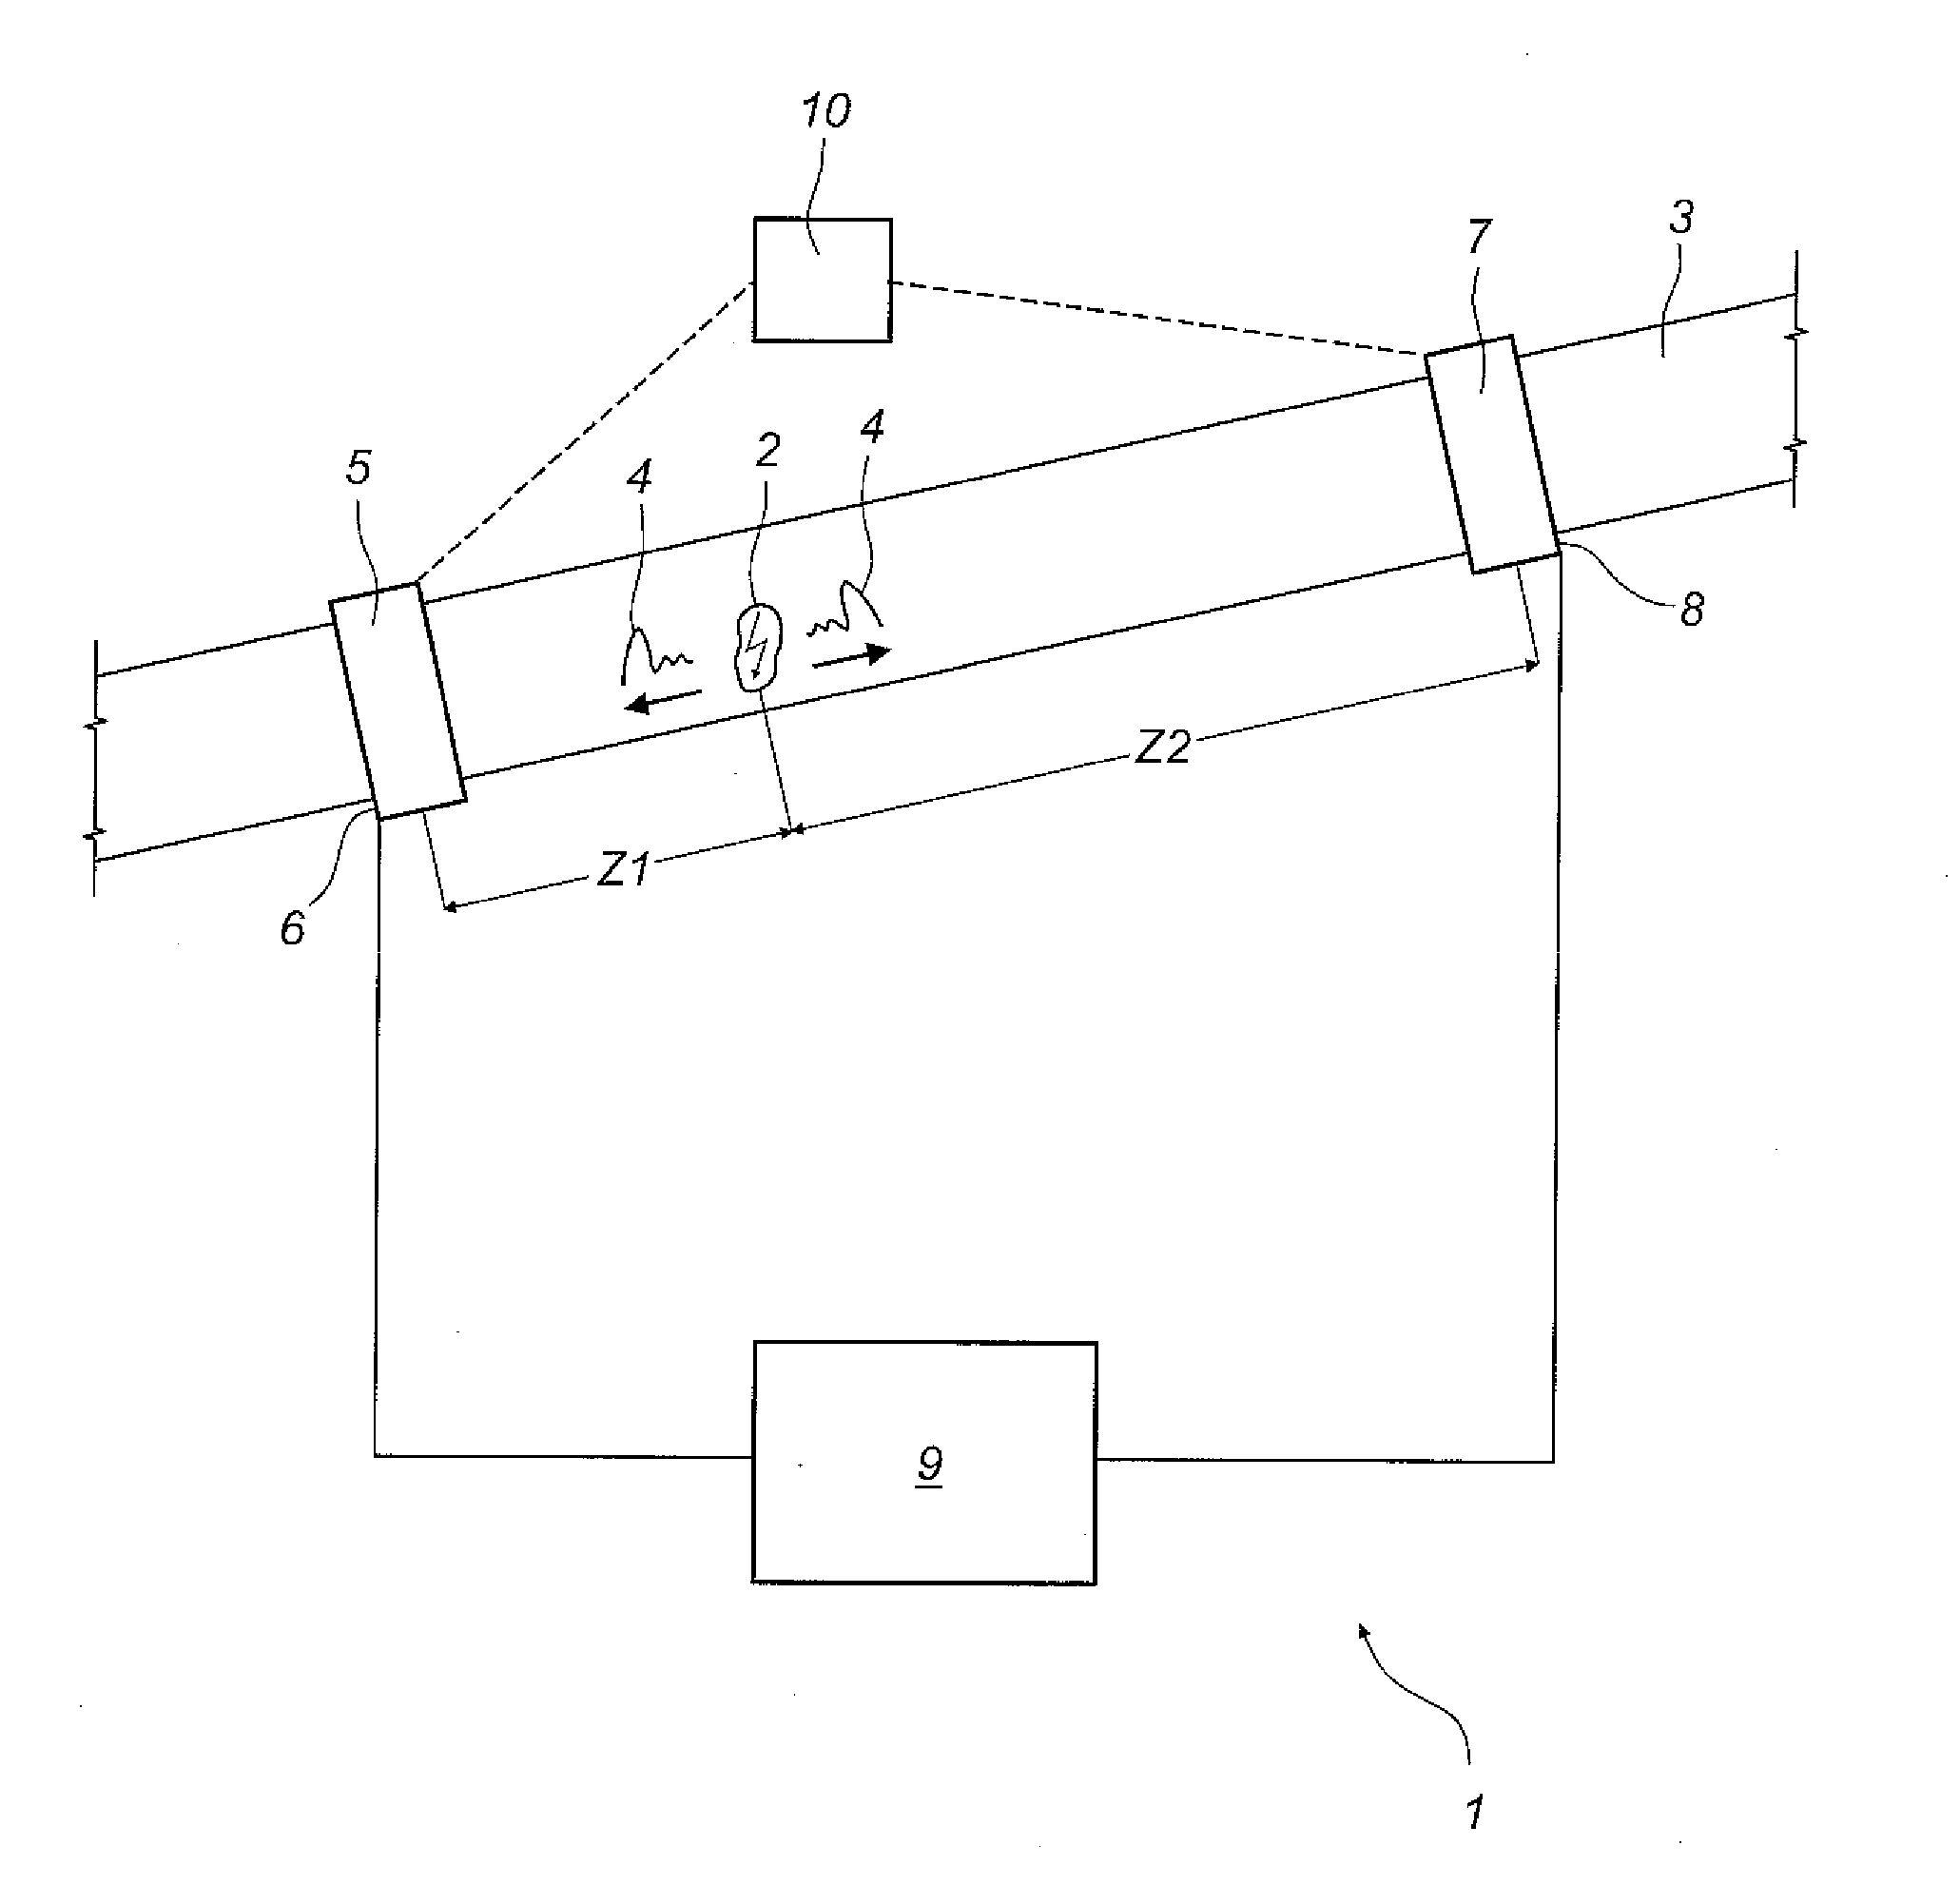 Device and method for locating partial discharges